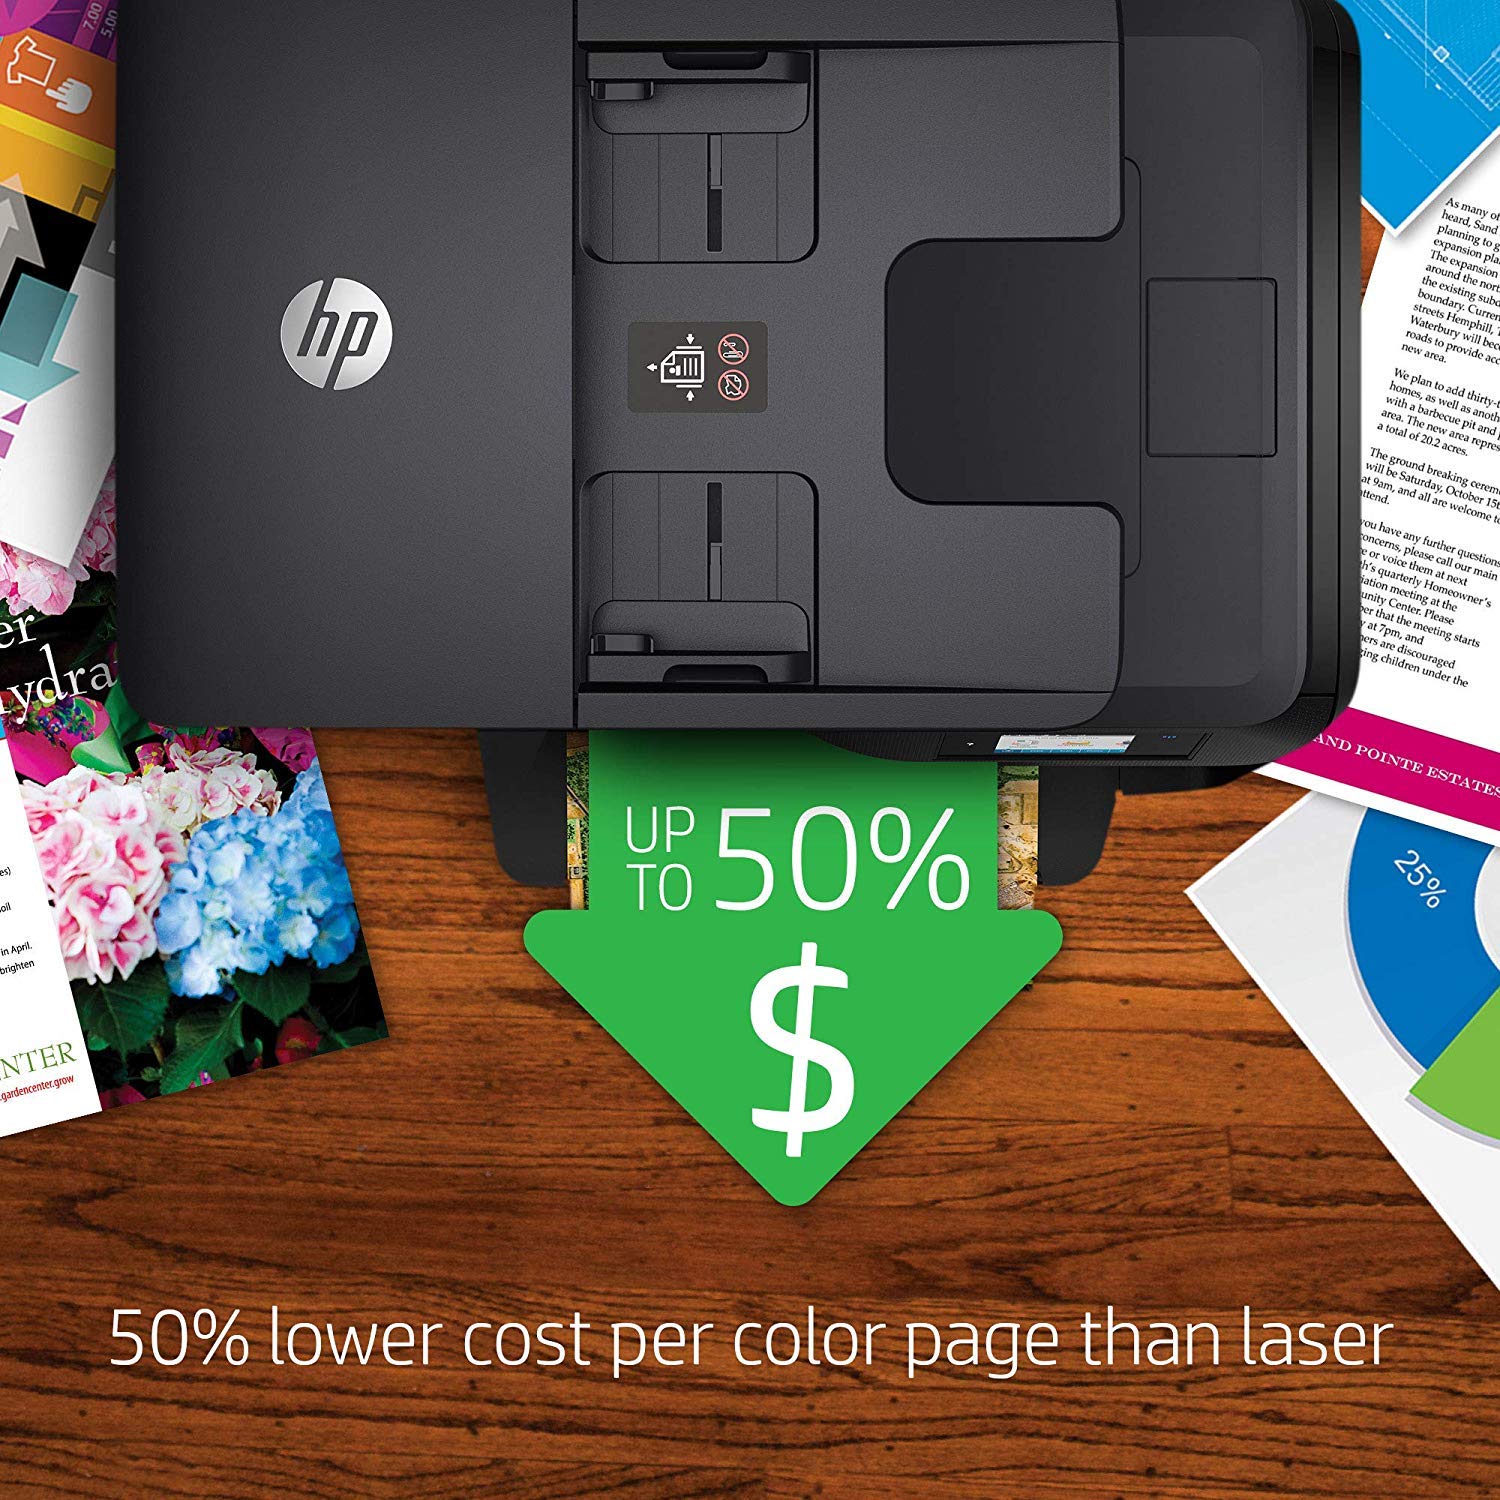 Mua Hp Officejet Pro 8710 All In One Wireless Printer Hp Instant Ink Or Amazon Dash 7613